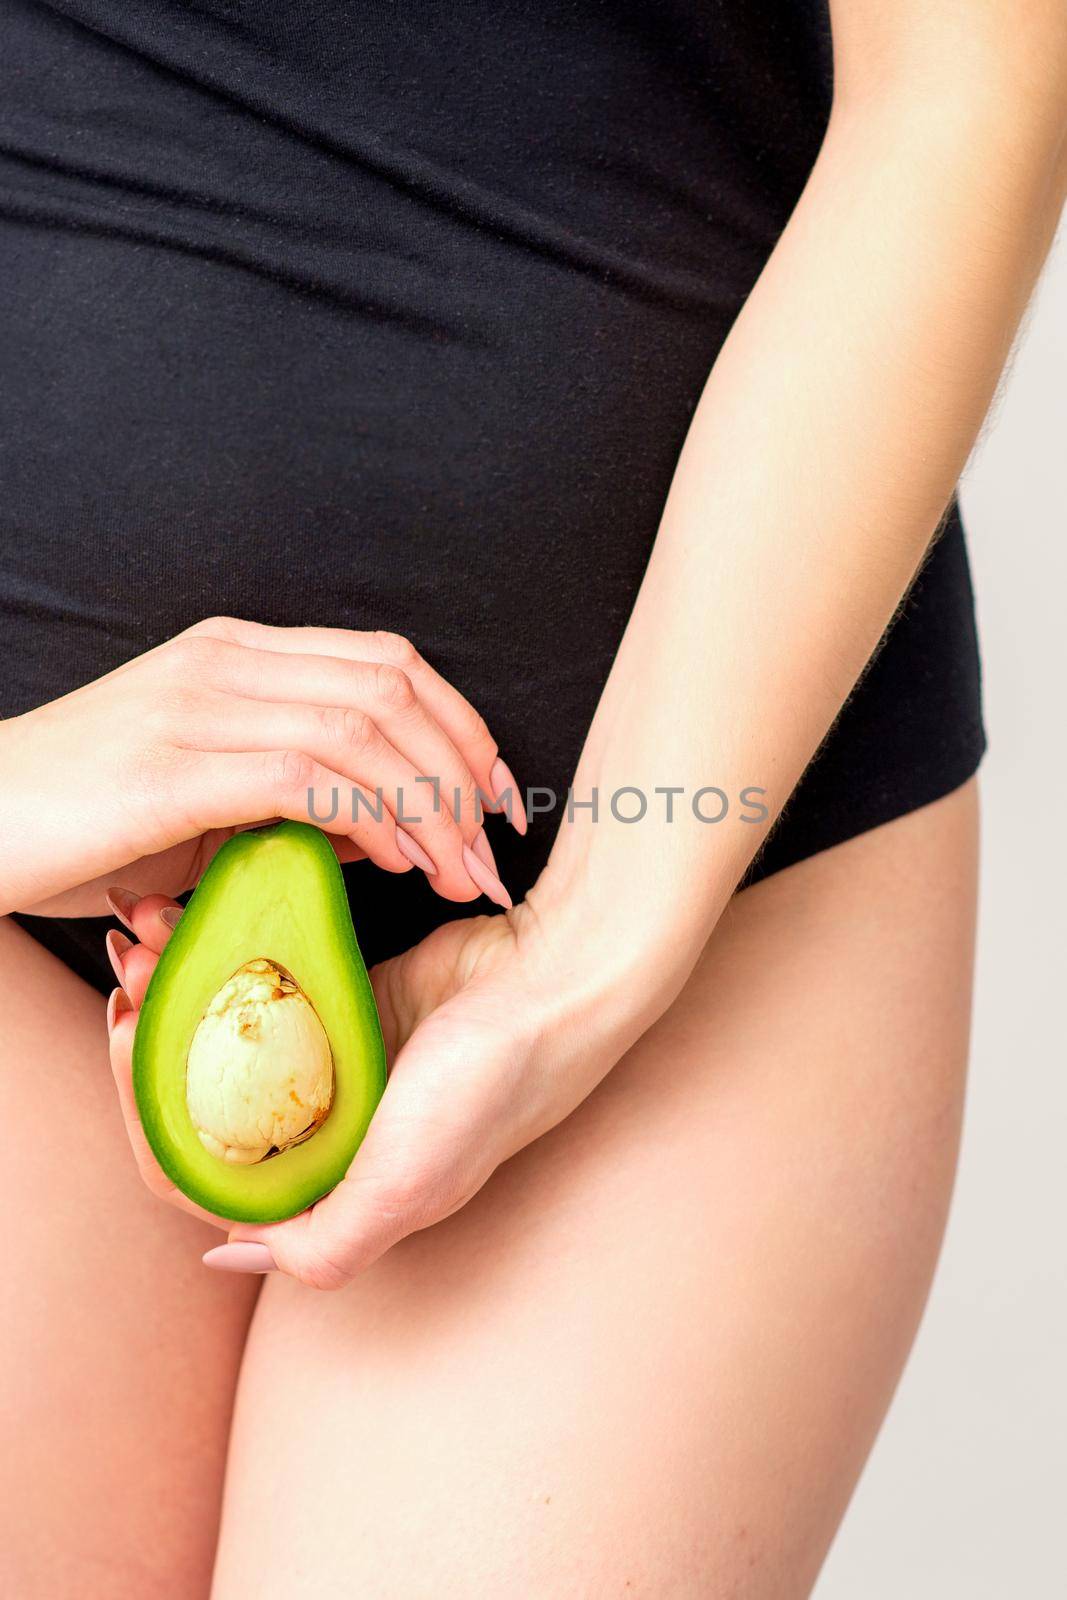 Healthy nutrition and pregnancy concept. Young woman holding one half of an avocado fruit close to her belly over a white background. by okskukuruza